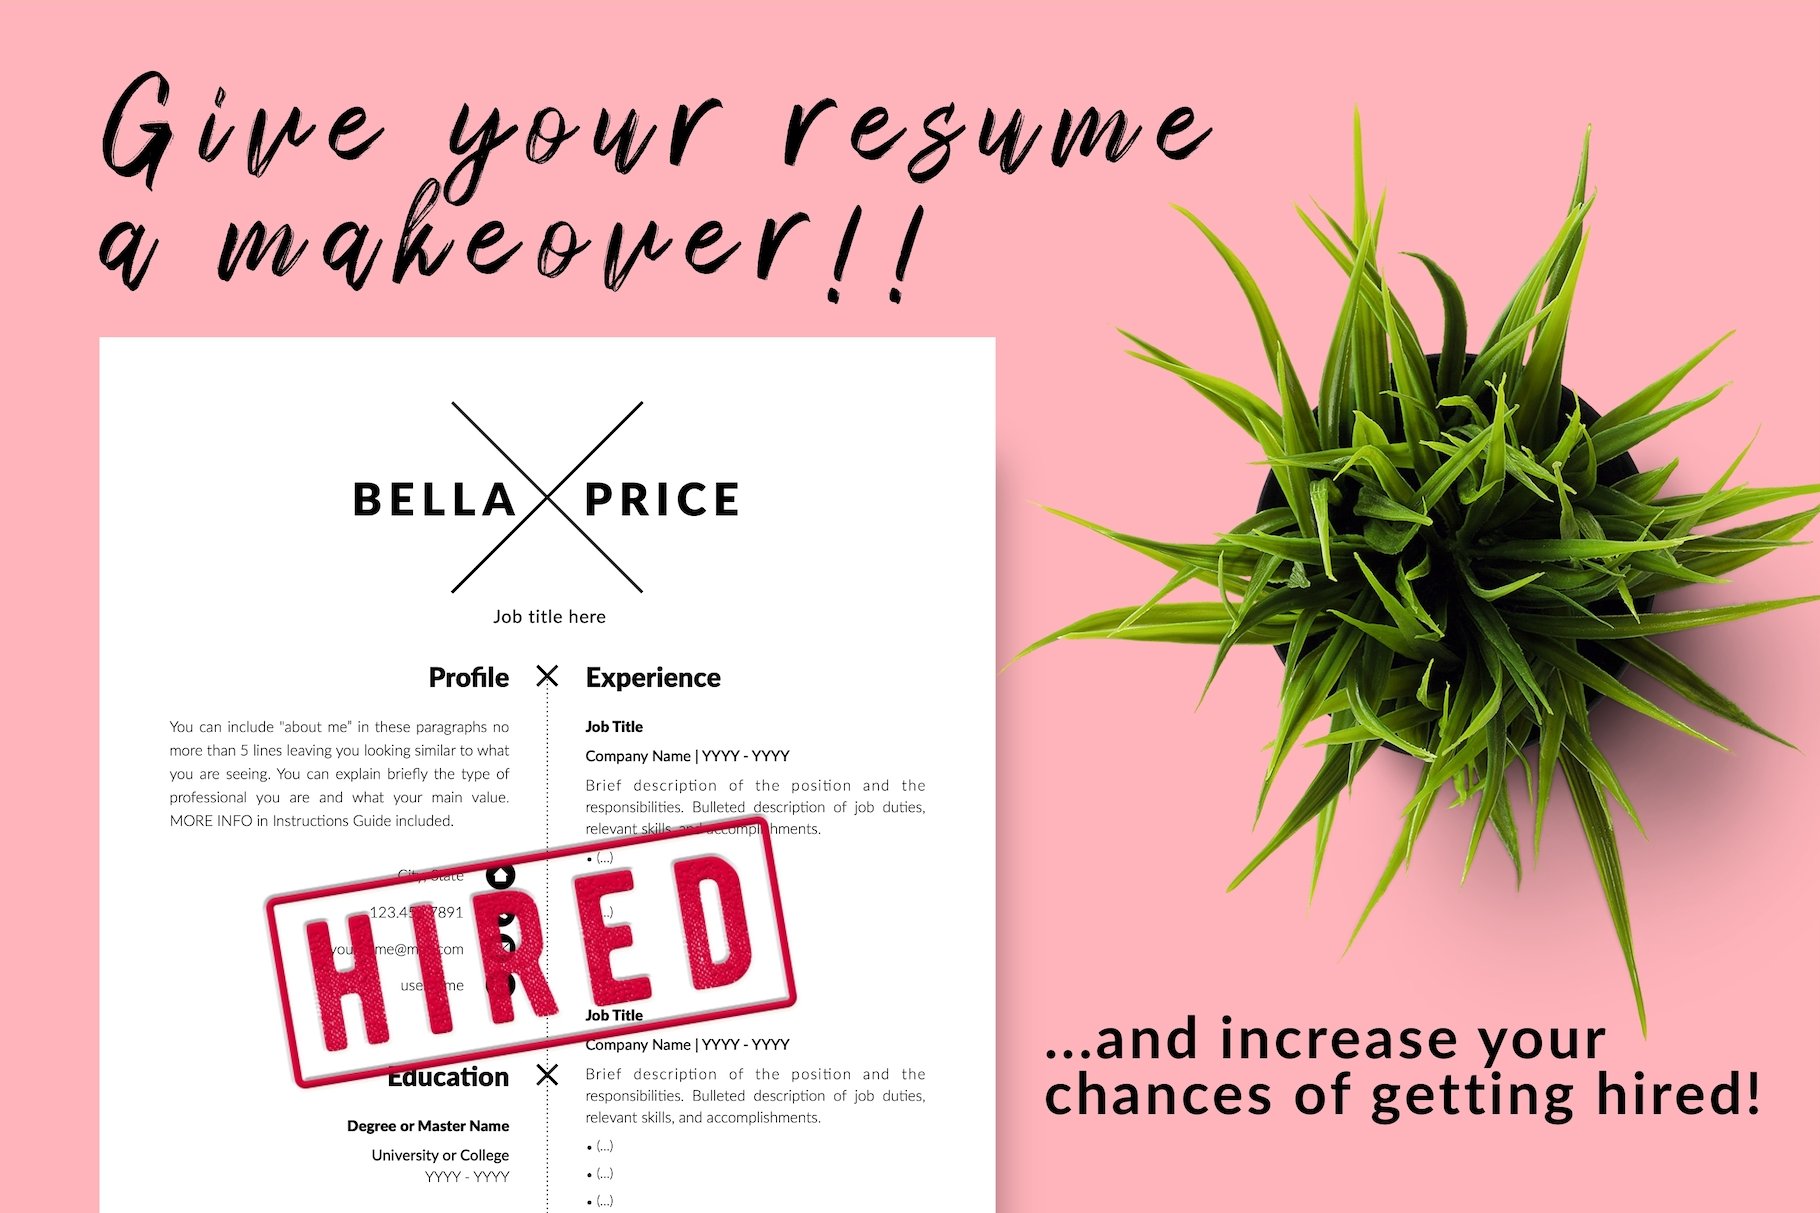 resume cv template bella price for creative market 16 give your resume a makeover 552